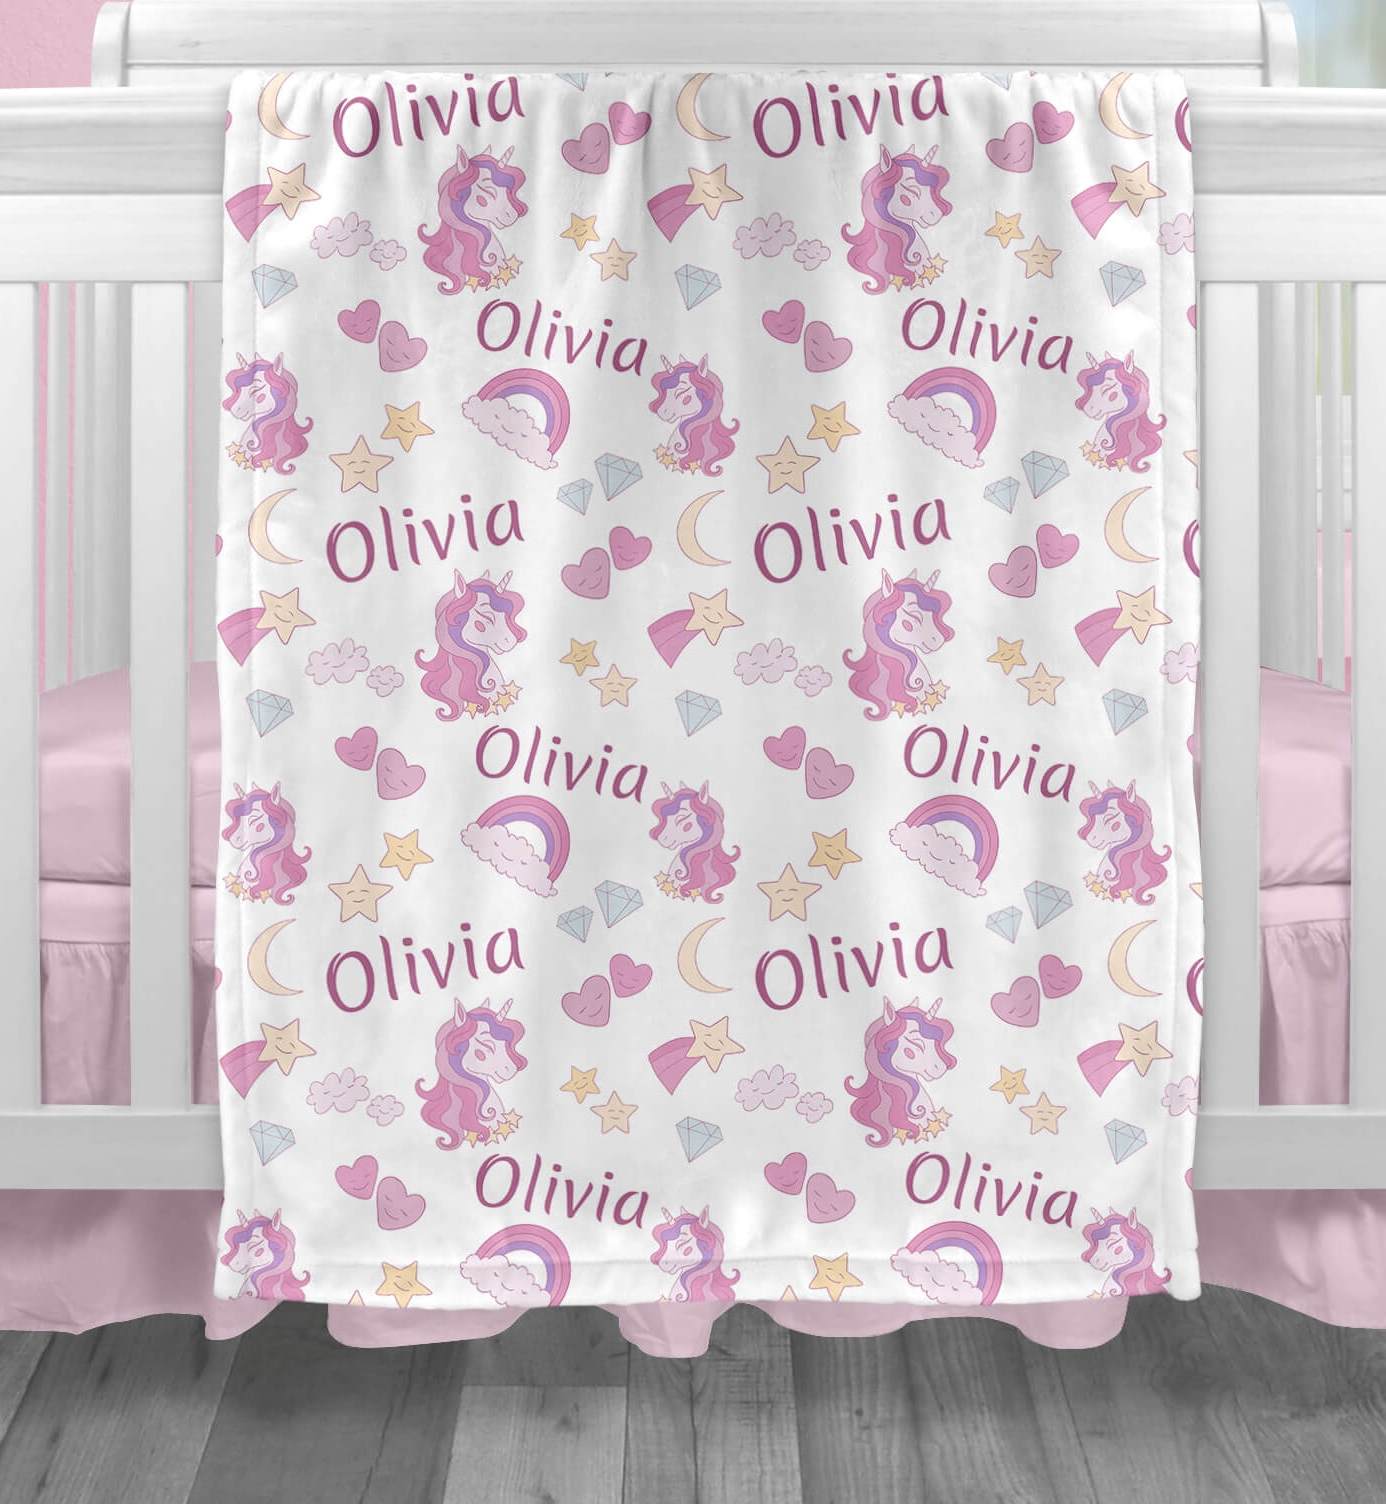 Personalized Baby Blankets for Girls with Name, Unicorns and Rainbows